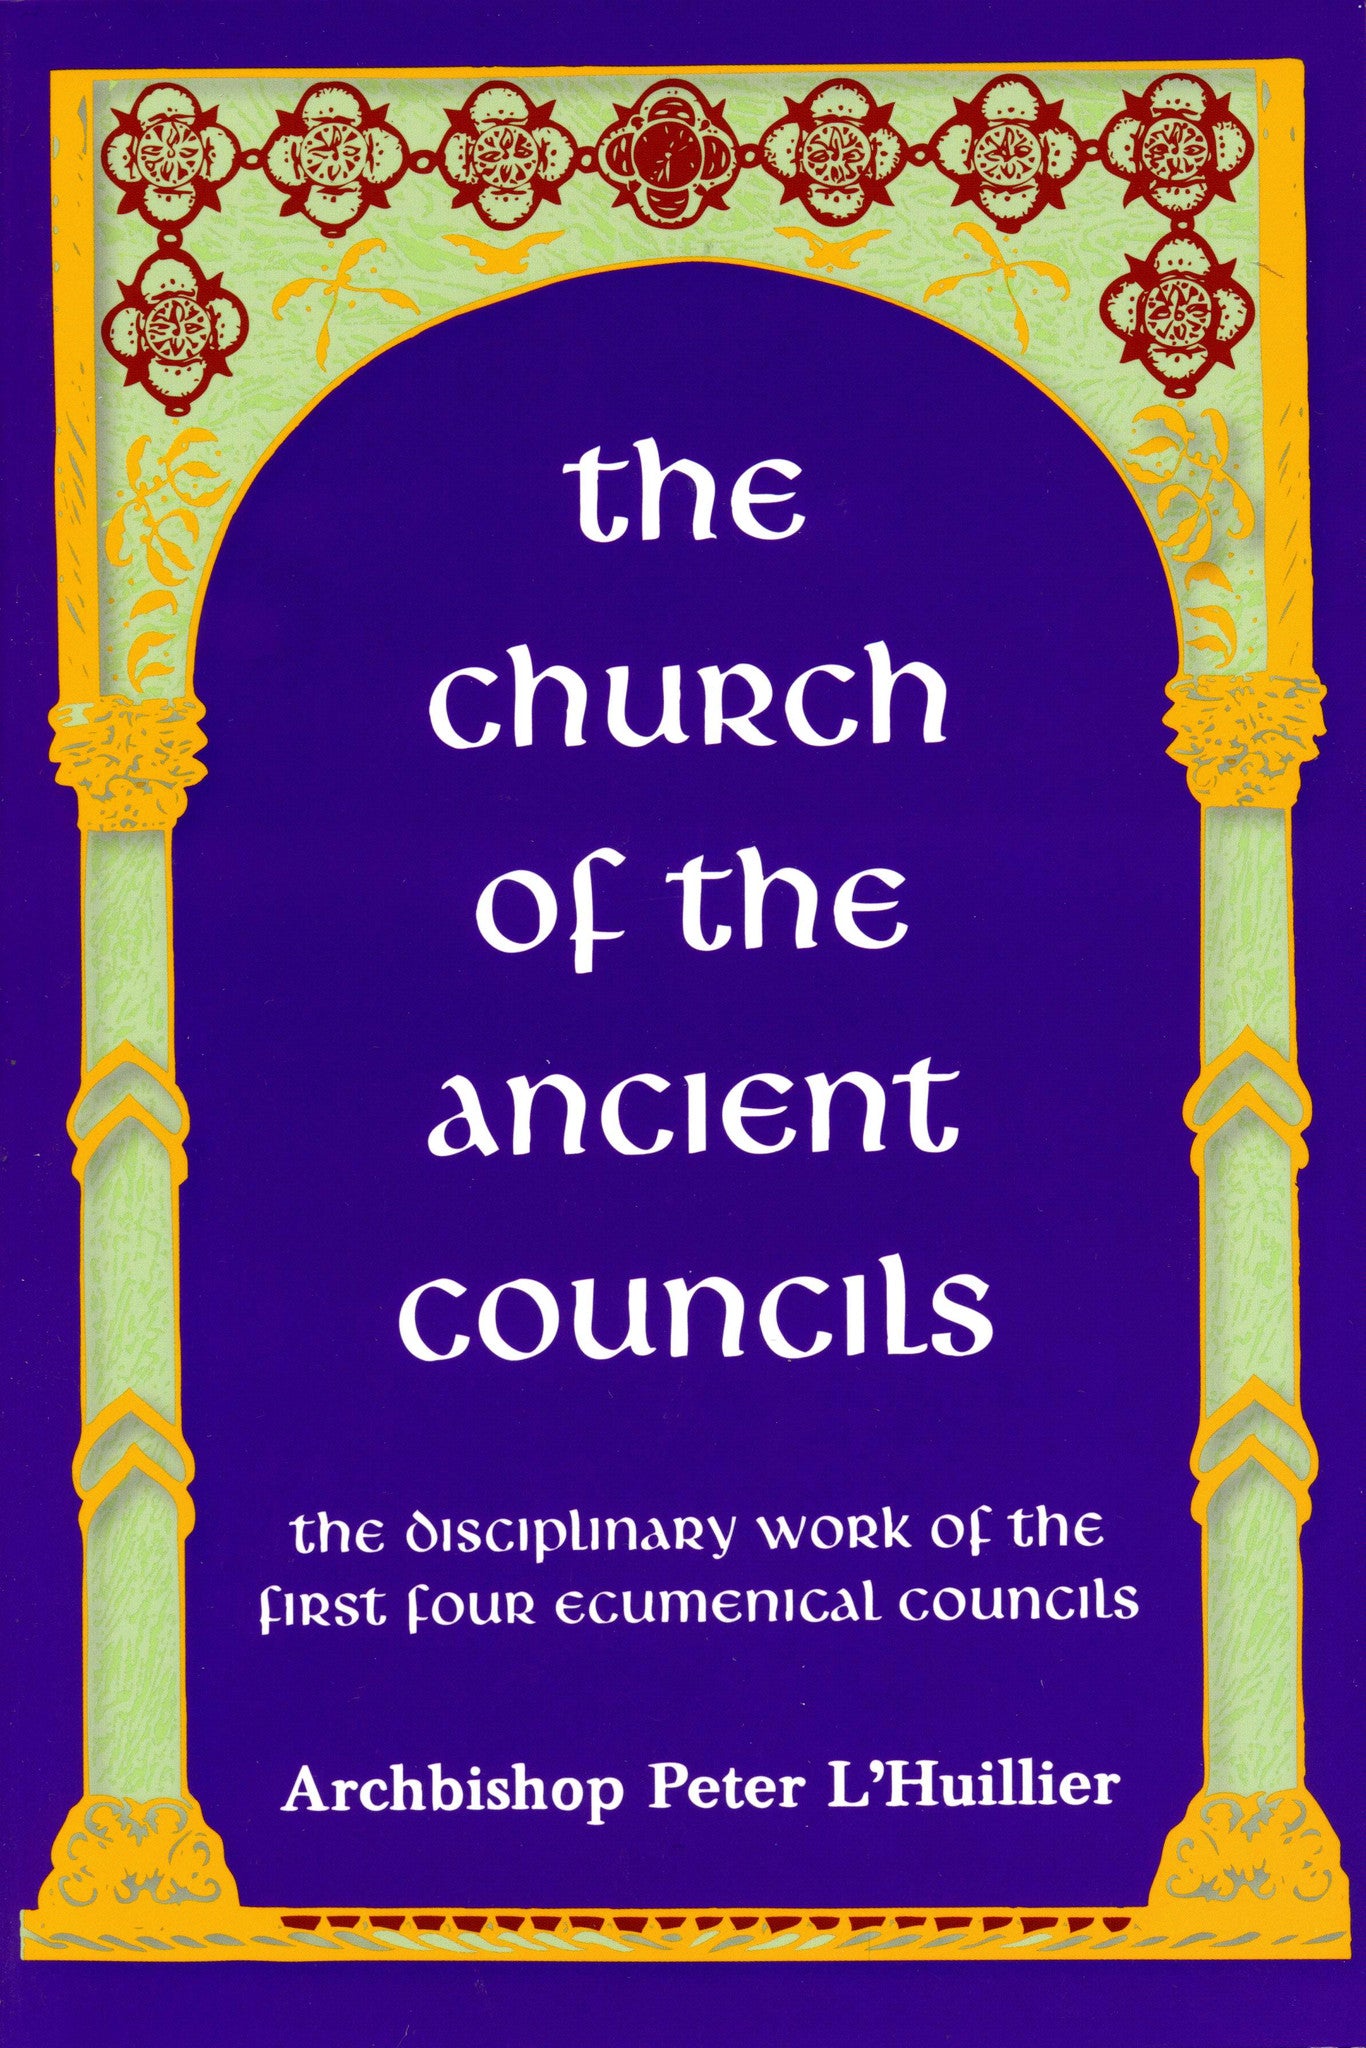 The Church of the Ancient Councils: The Disciplinary Work of the First Four Ecumenical Councils